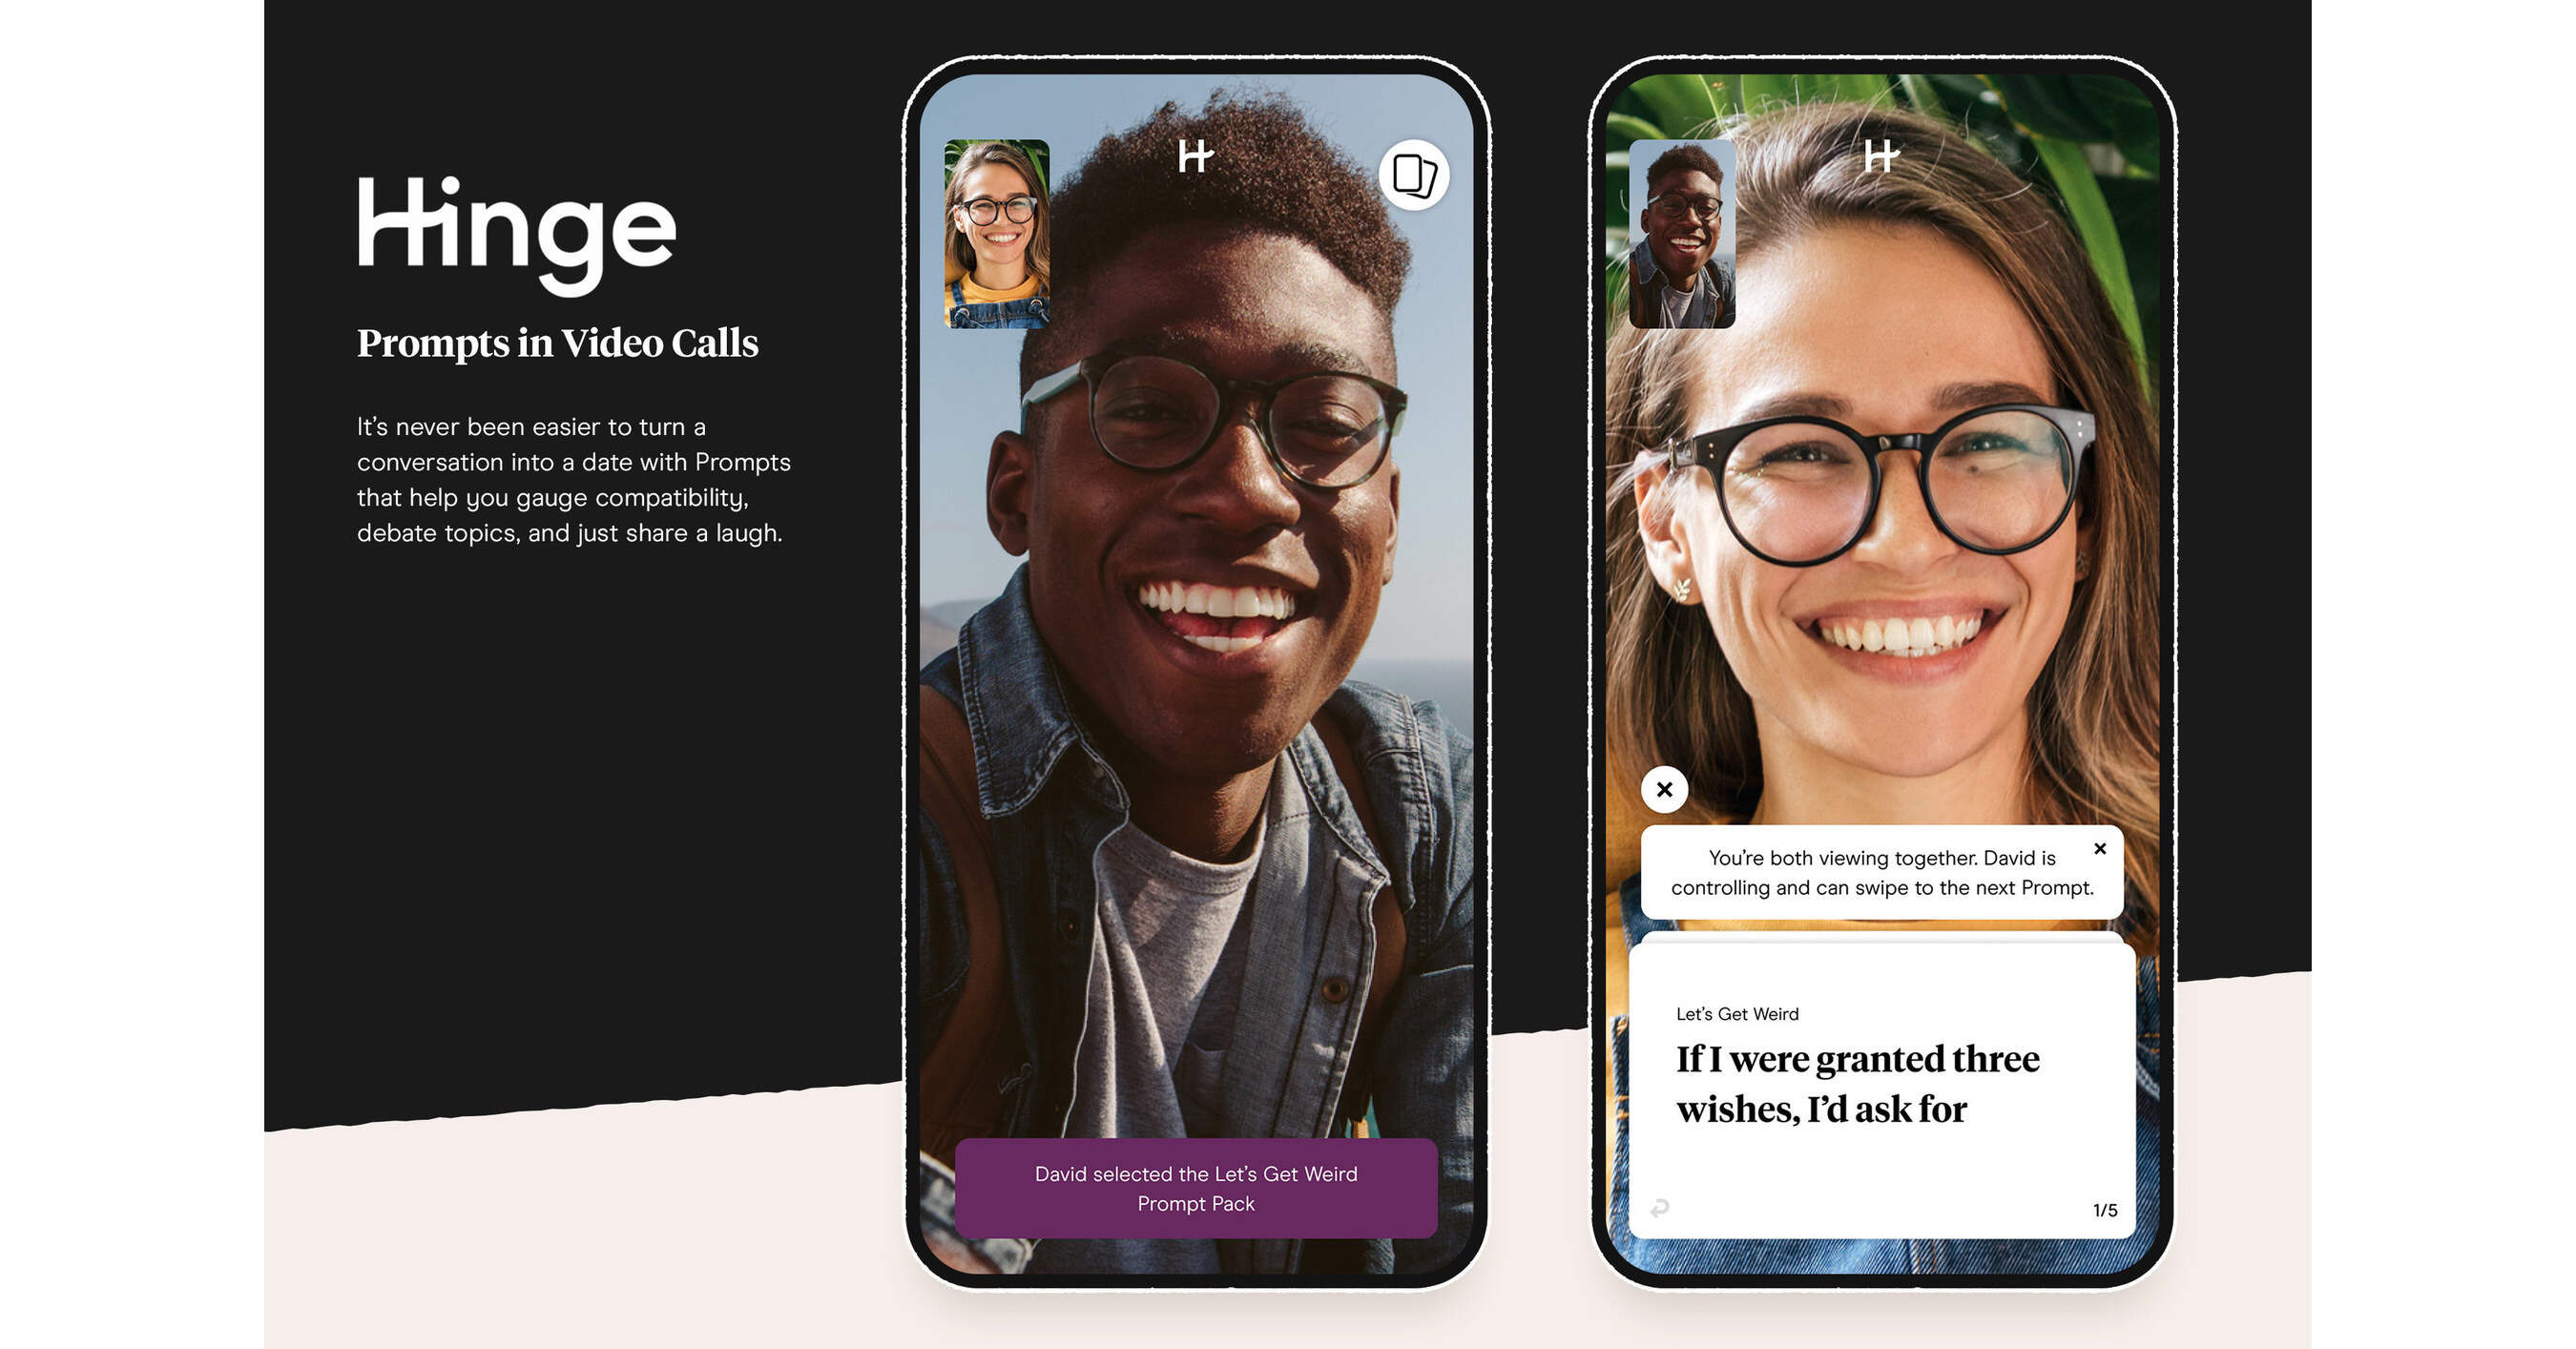 hinge-wants-to-make-dating-easier-launches-most-compatible-feature